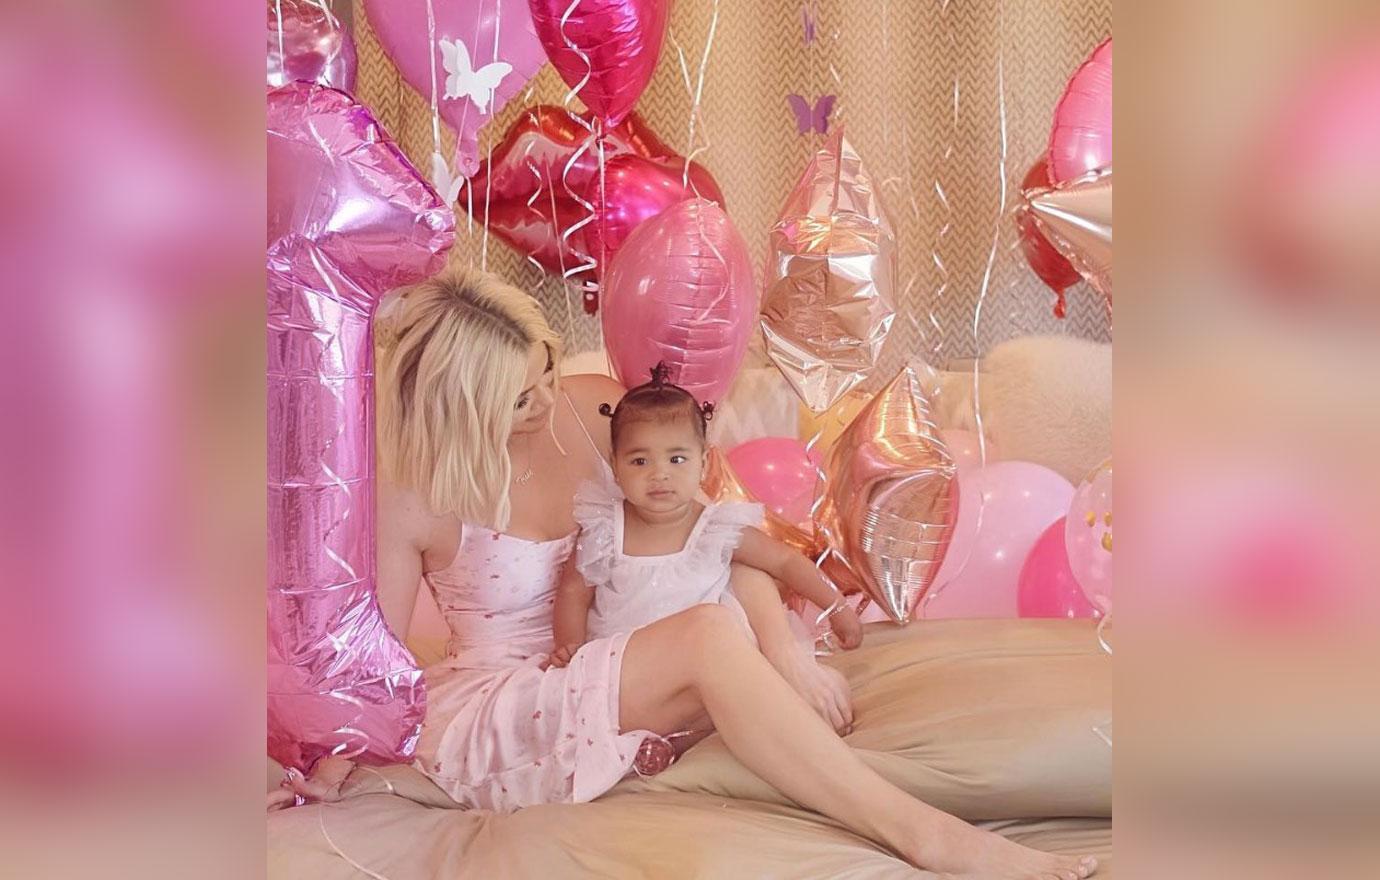 Khloé Kardashian Ignored Tristan Thompson at True's First Birthday Party -  Details on Party, Decor, and Food